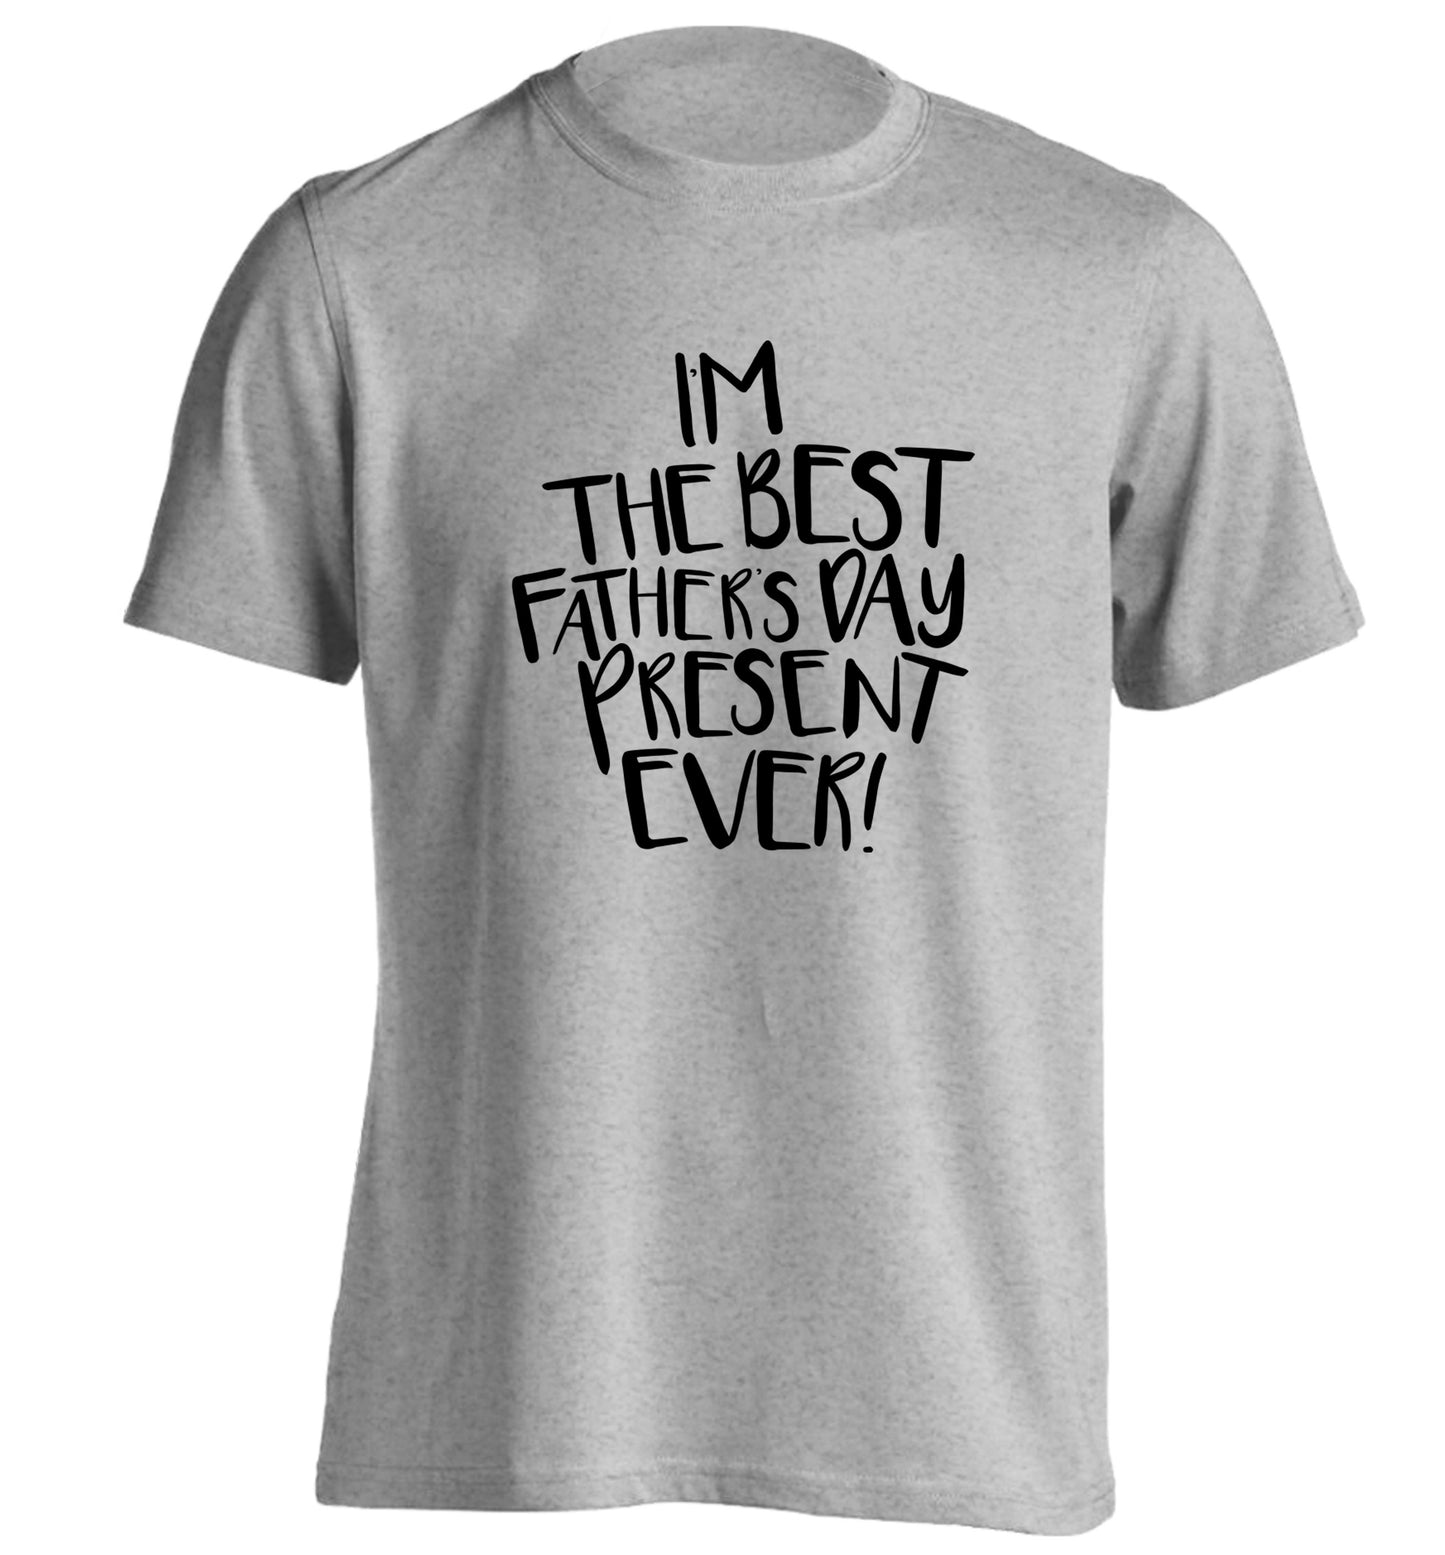 I'm the best father's day present ever! adults unisex grey Tshirt 2XL